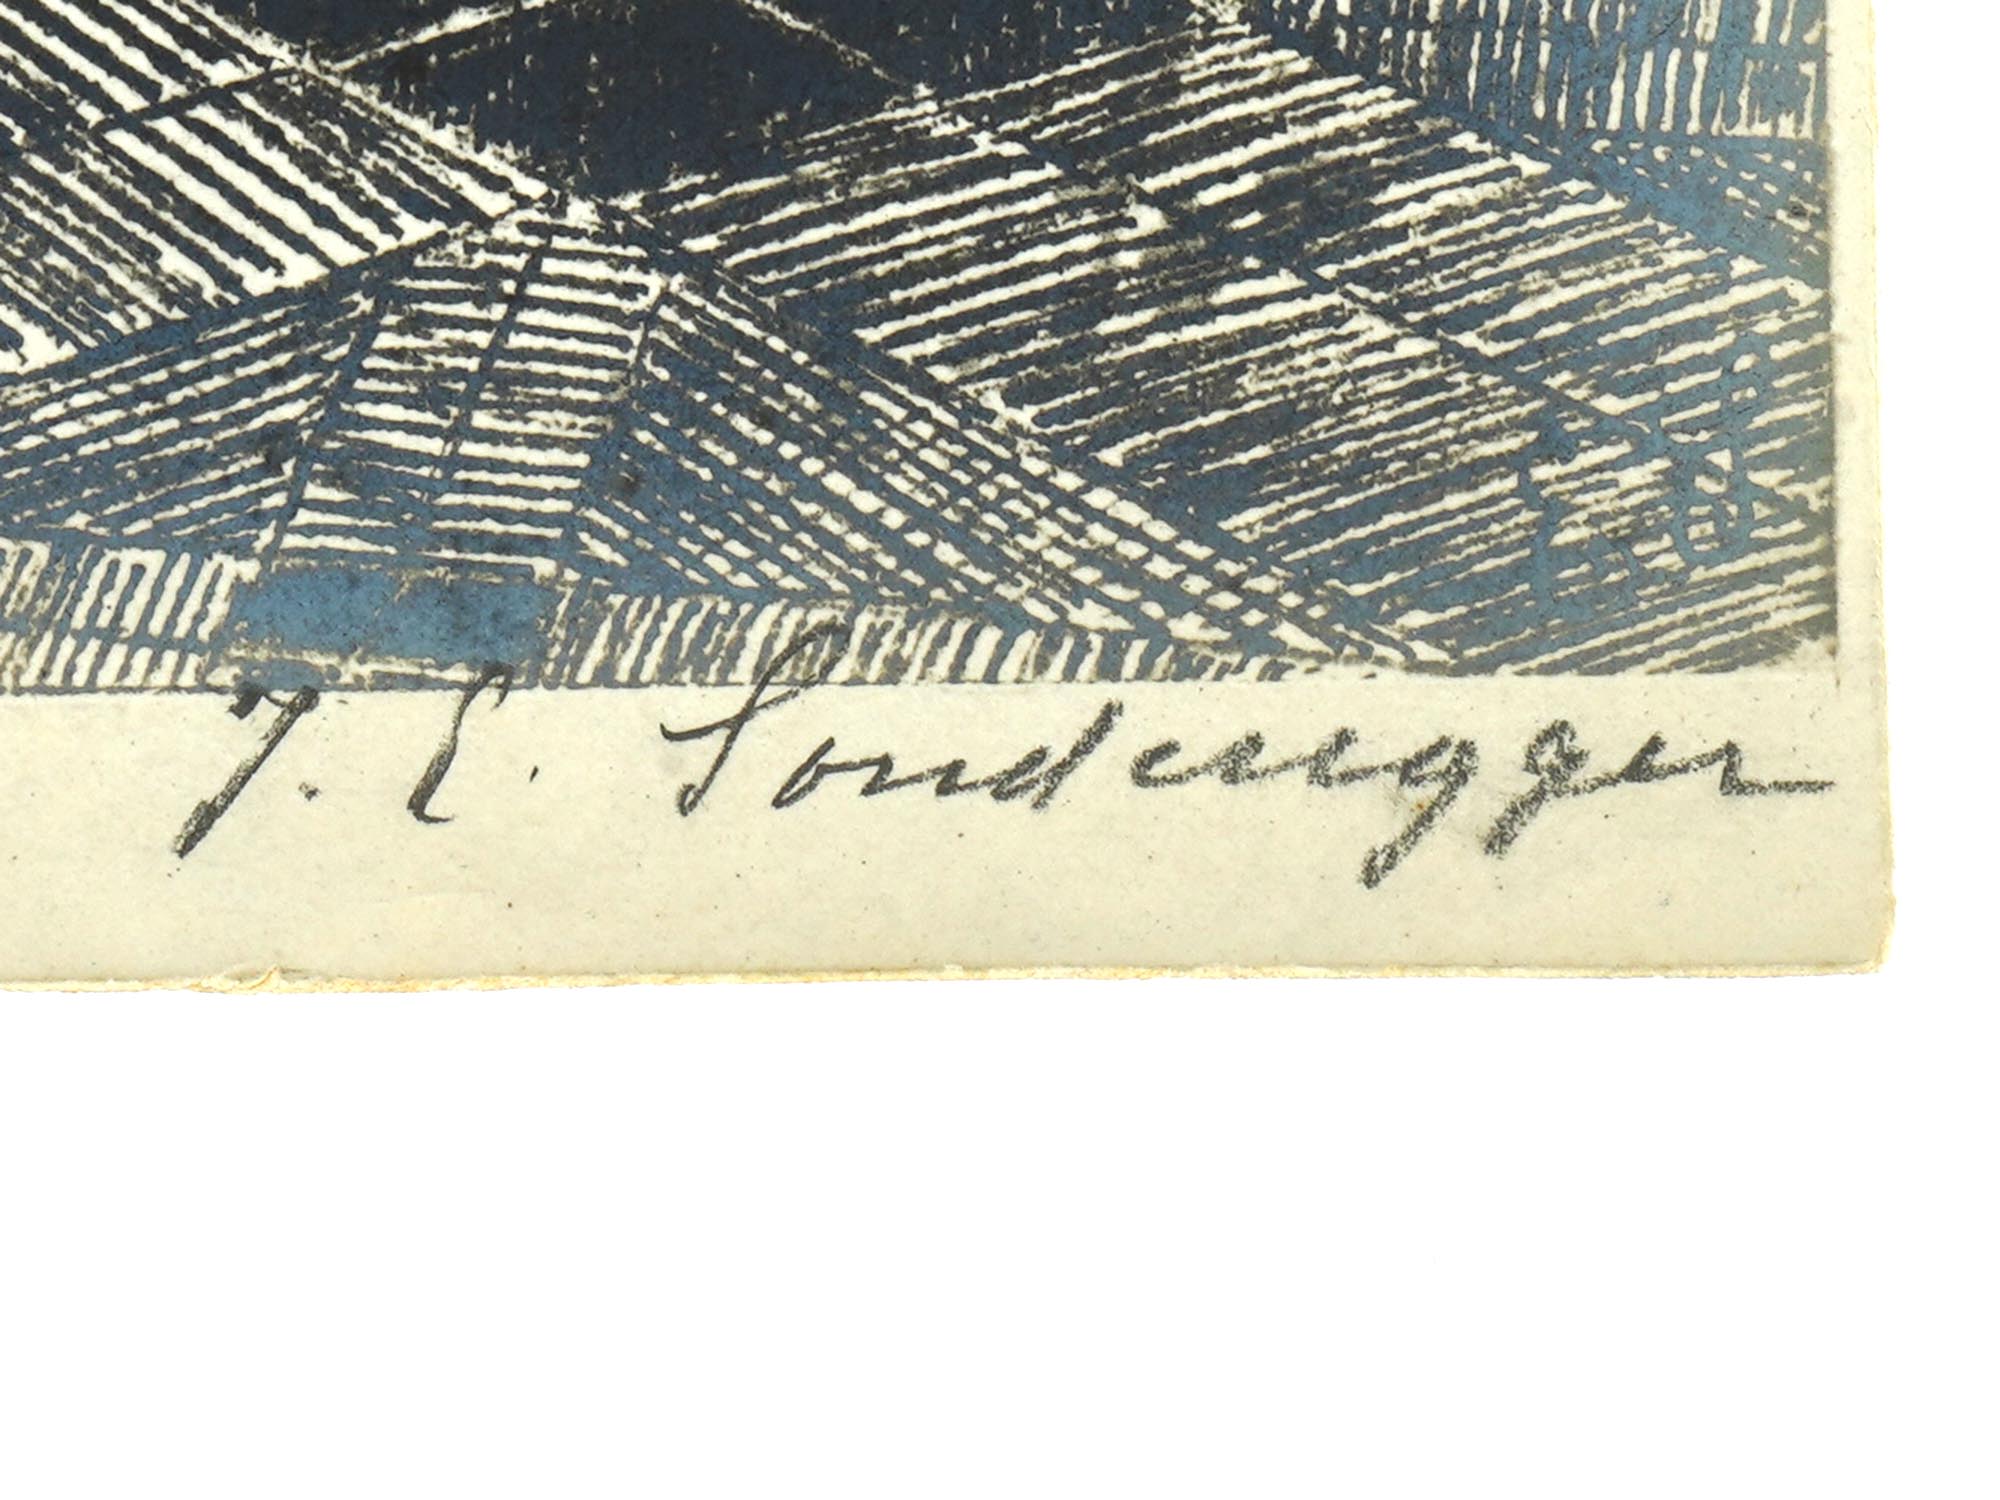 COLLECTION OF WOODCUTS BY JACQUES ERNST SONDEREGGER PIC-7